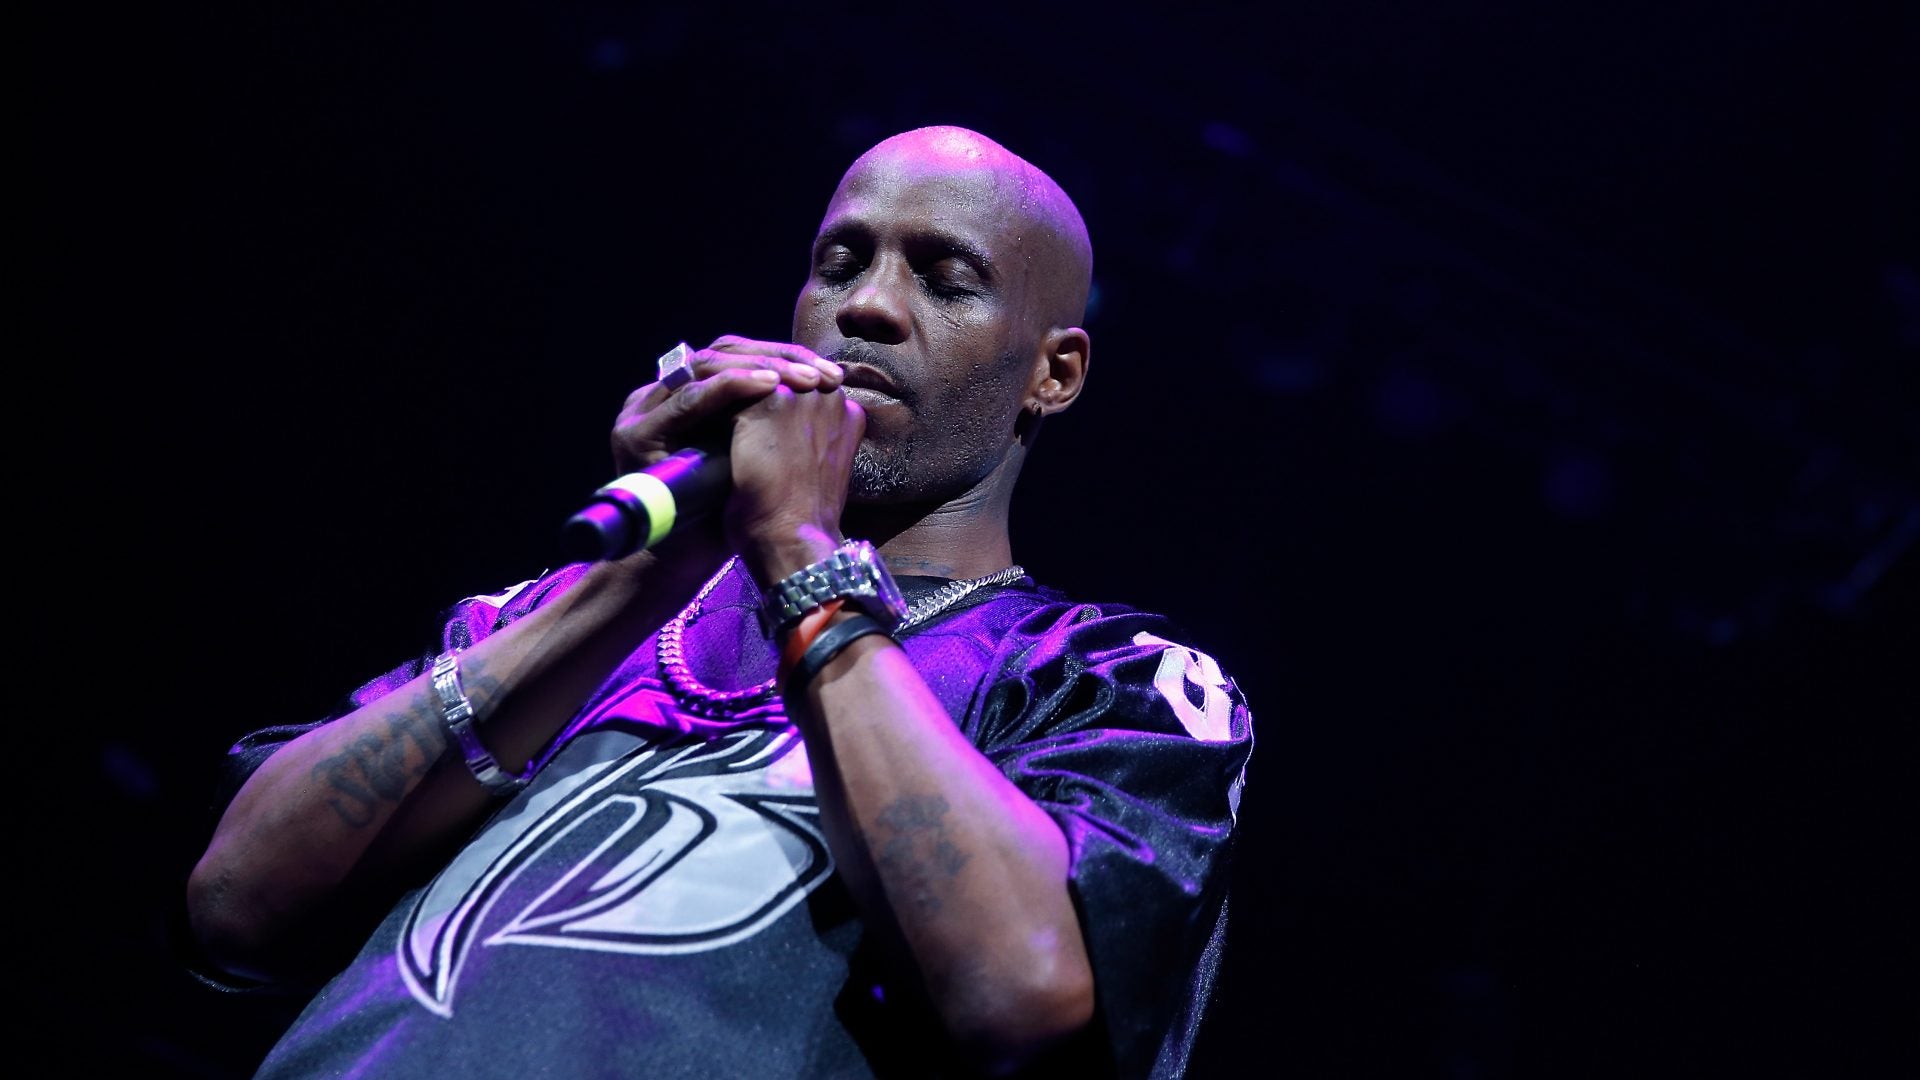 DMX Will Be Honored With a Public Memorial Service at Brooklyn’s Barclays Center